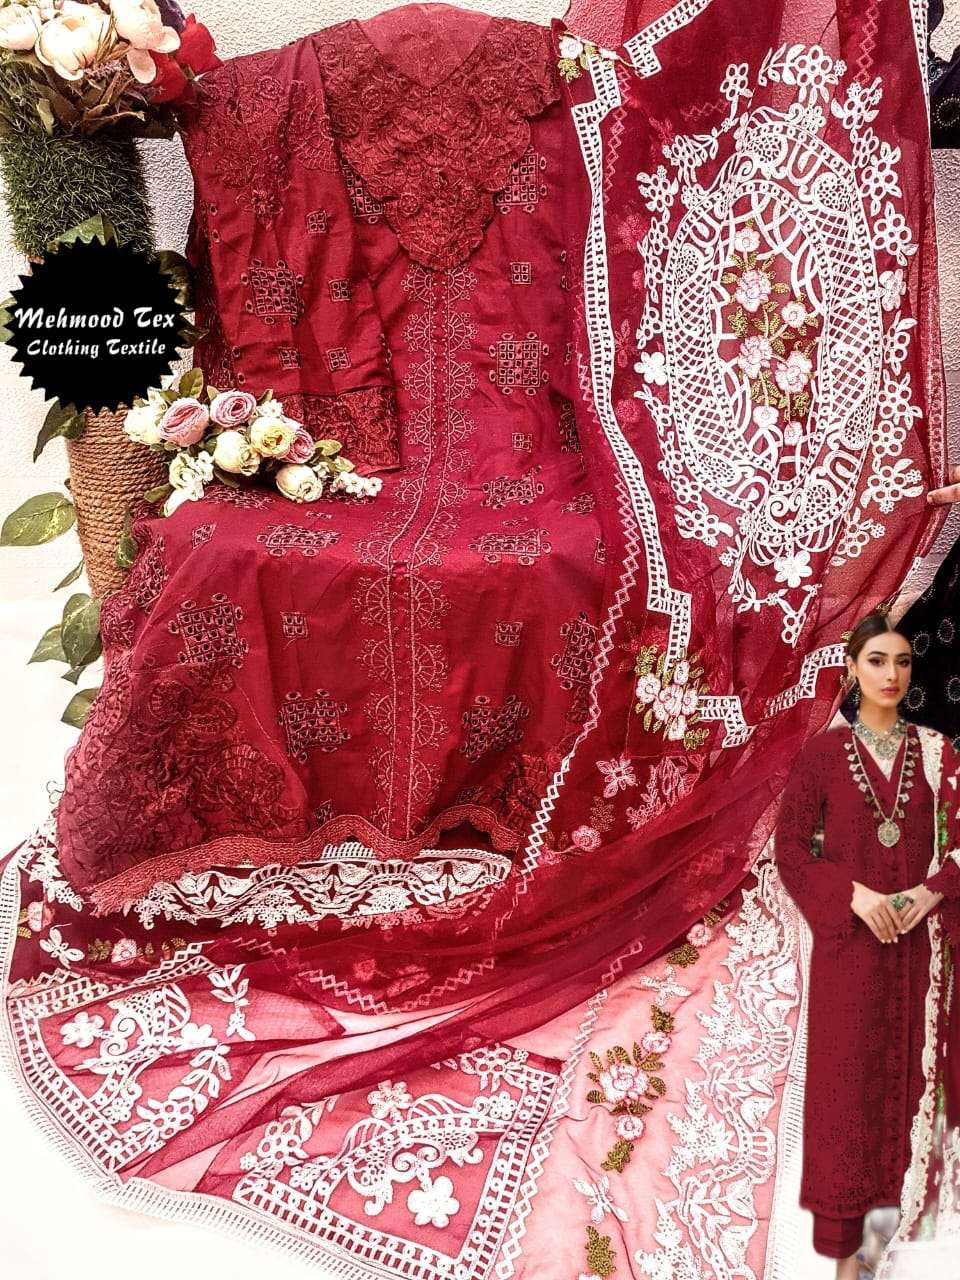 MEHMOOD HIT DESIGN M-09 COLOURS BY MEHMOOD TEX M-09 TO M-09-B SERIES DESIGNER PAKISTANI SUITS BEAUTIFUL FANCY COLORFUL STYLISH PARTY WEAR & OCCASIONAL WEAR COTTON EMBROIDERED DRESSES AT WHOLESALE PRICE